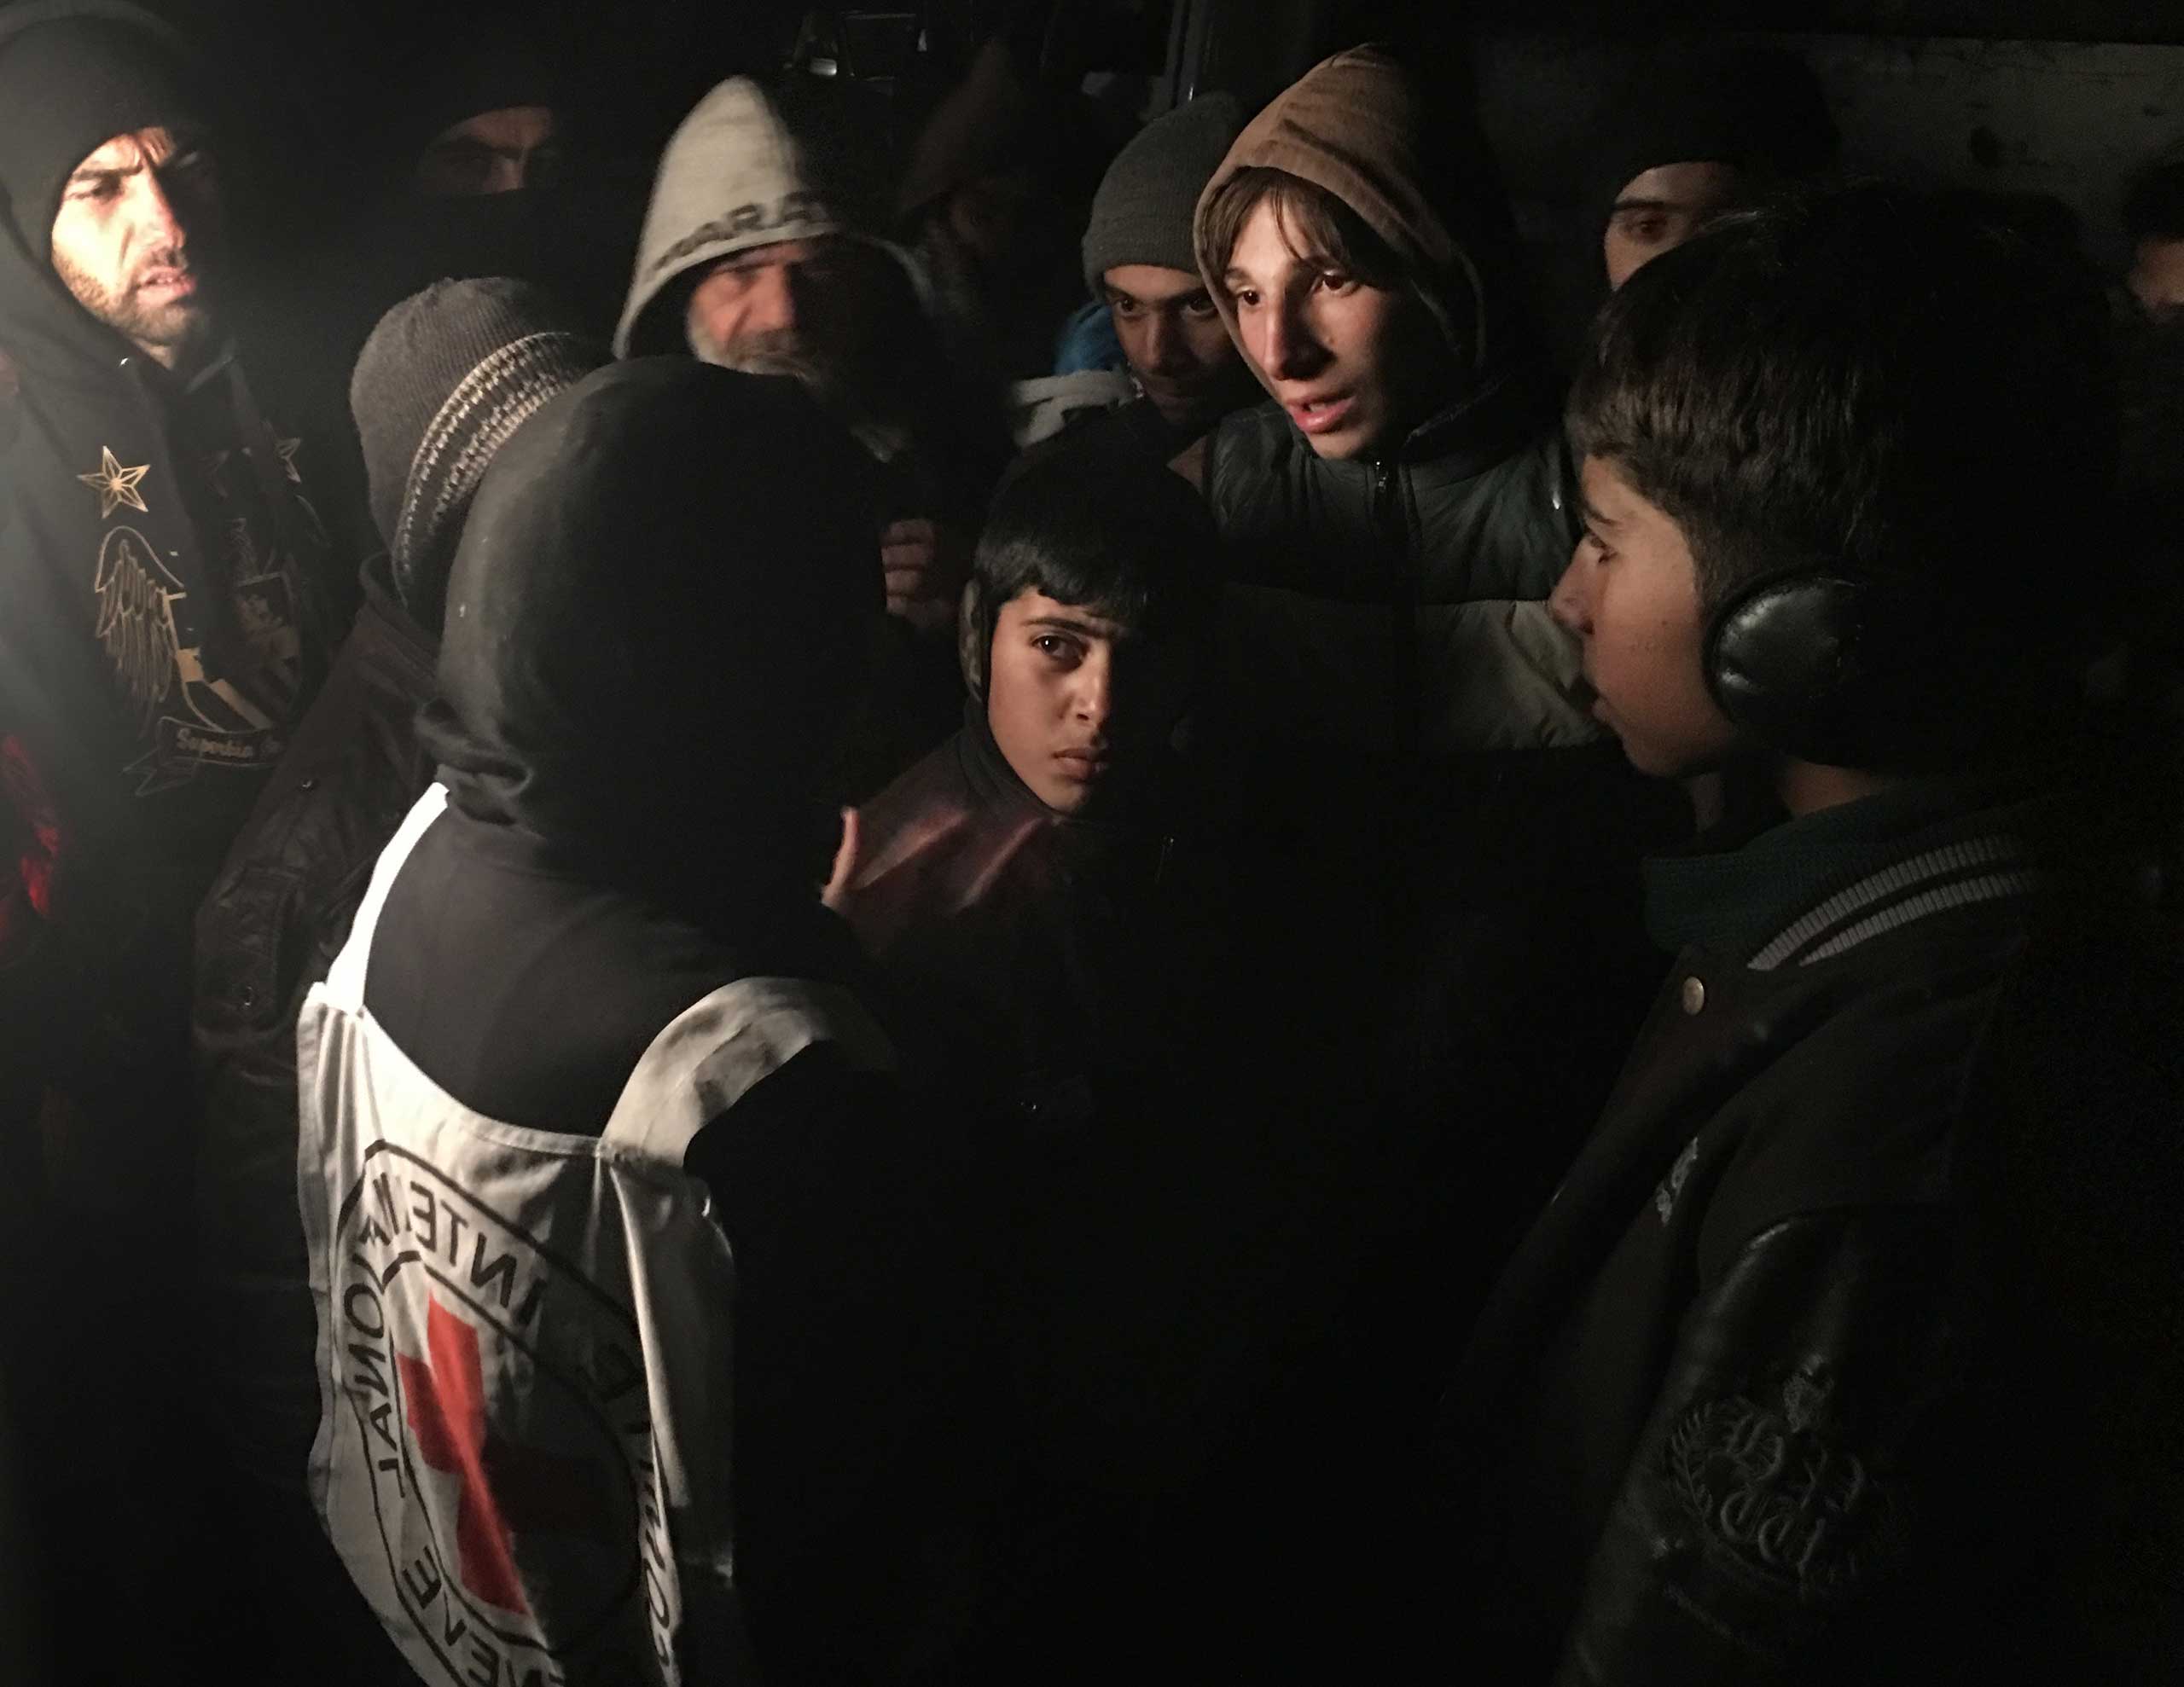 ICRC Head of Delegation Marianne Gasser speaks to residents of Madaya, a besieged town in Syria, as they gather around an aid convoy, Jan. 11, 2016. The International Committee of the Red Cross, working alongside the Syrian Arab Red Crescent and United Nations, began to deliver aid to thousands of people living in three besieged areas in Syria. (Pawel Krzysiek—ICRC)